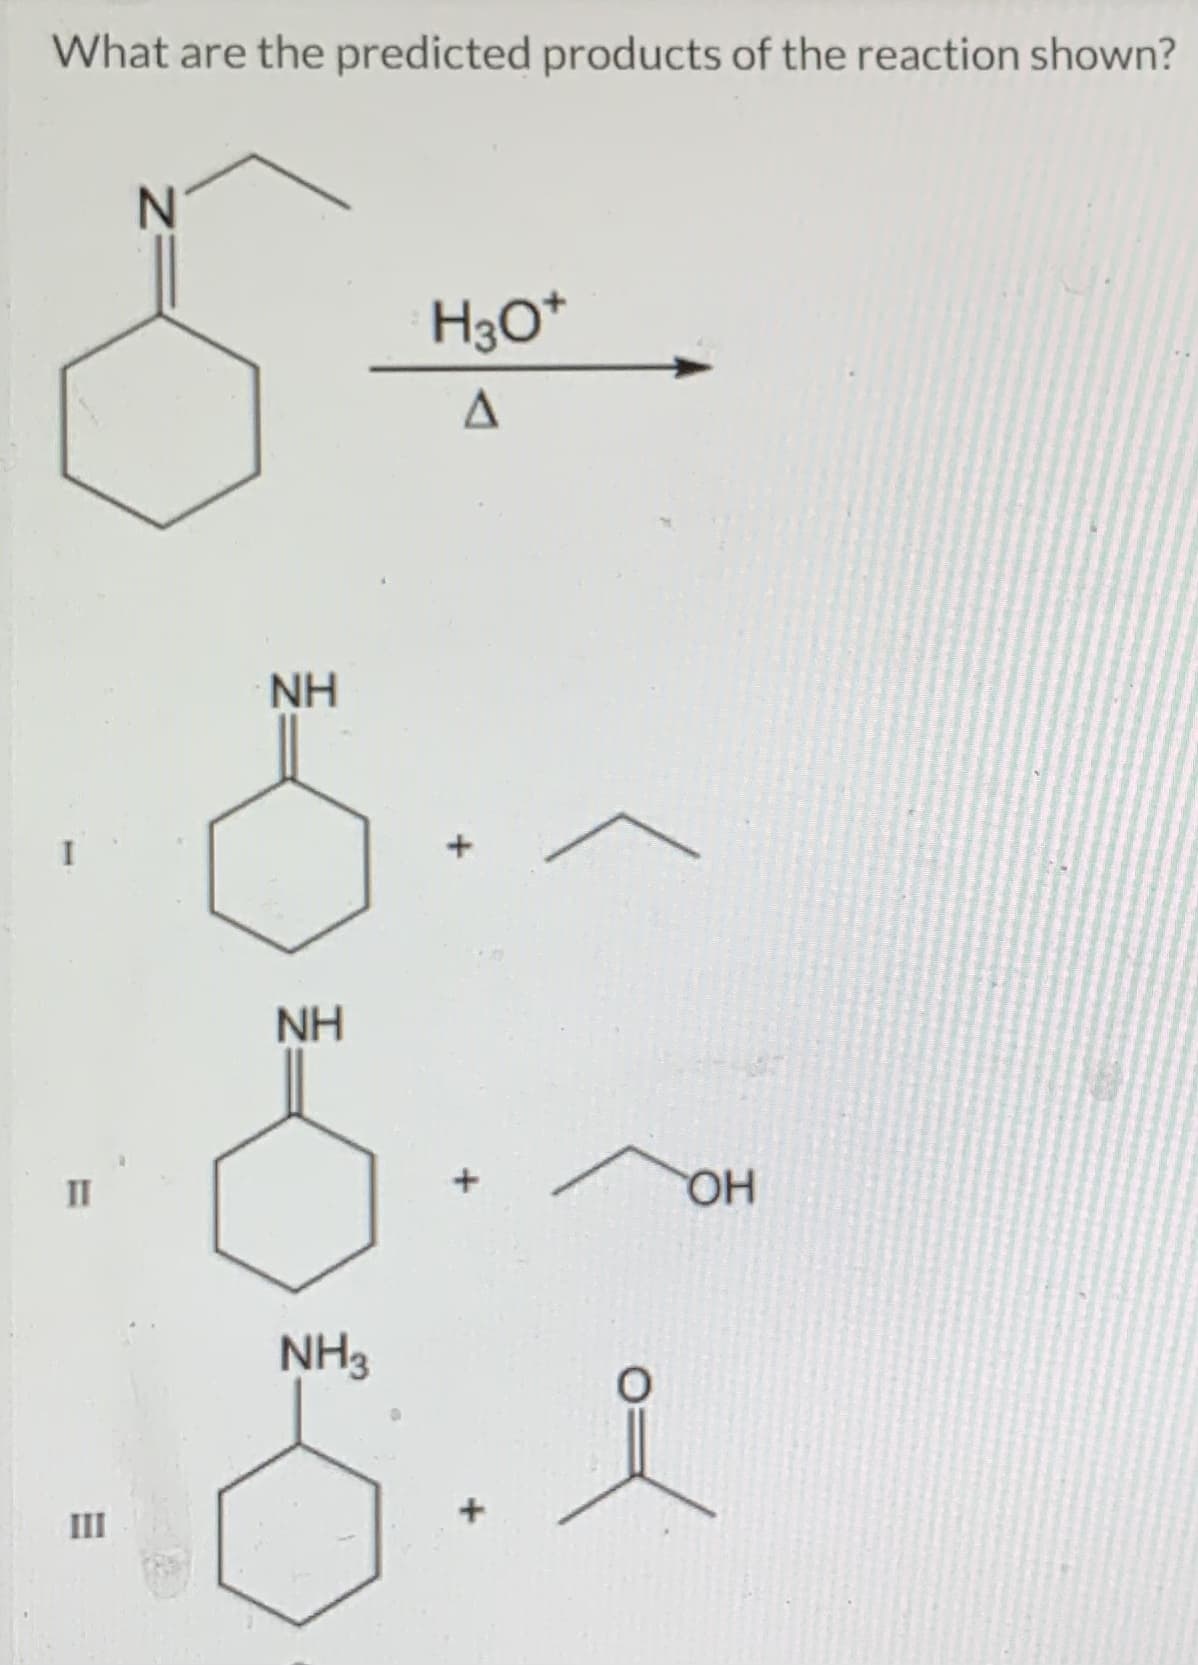 What are the predicted products of the reaction shown?
11
III
N
H3O+
A
NH
8.~
8.-
NH
NH3
O
8.1
OH